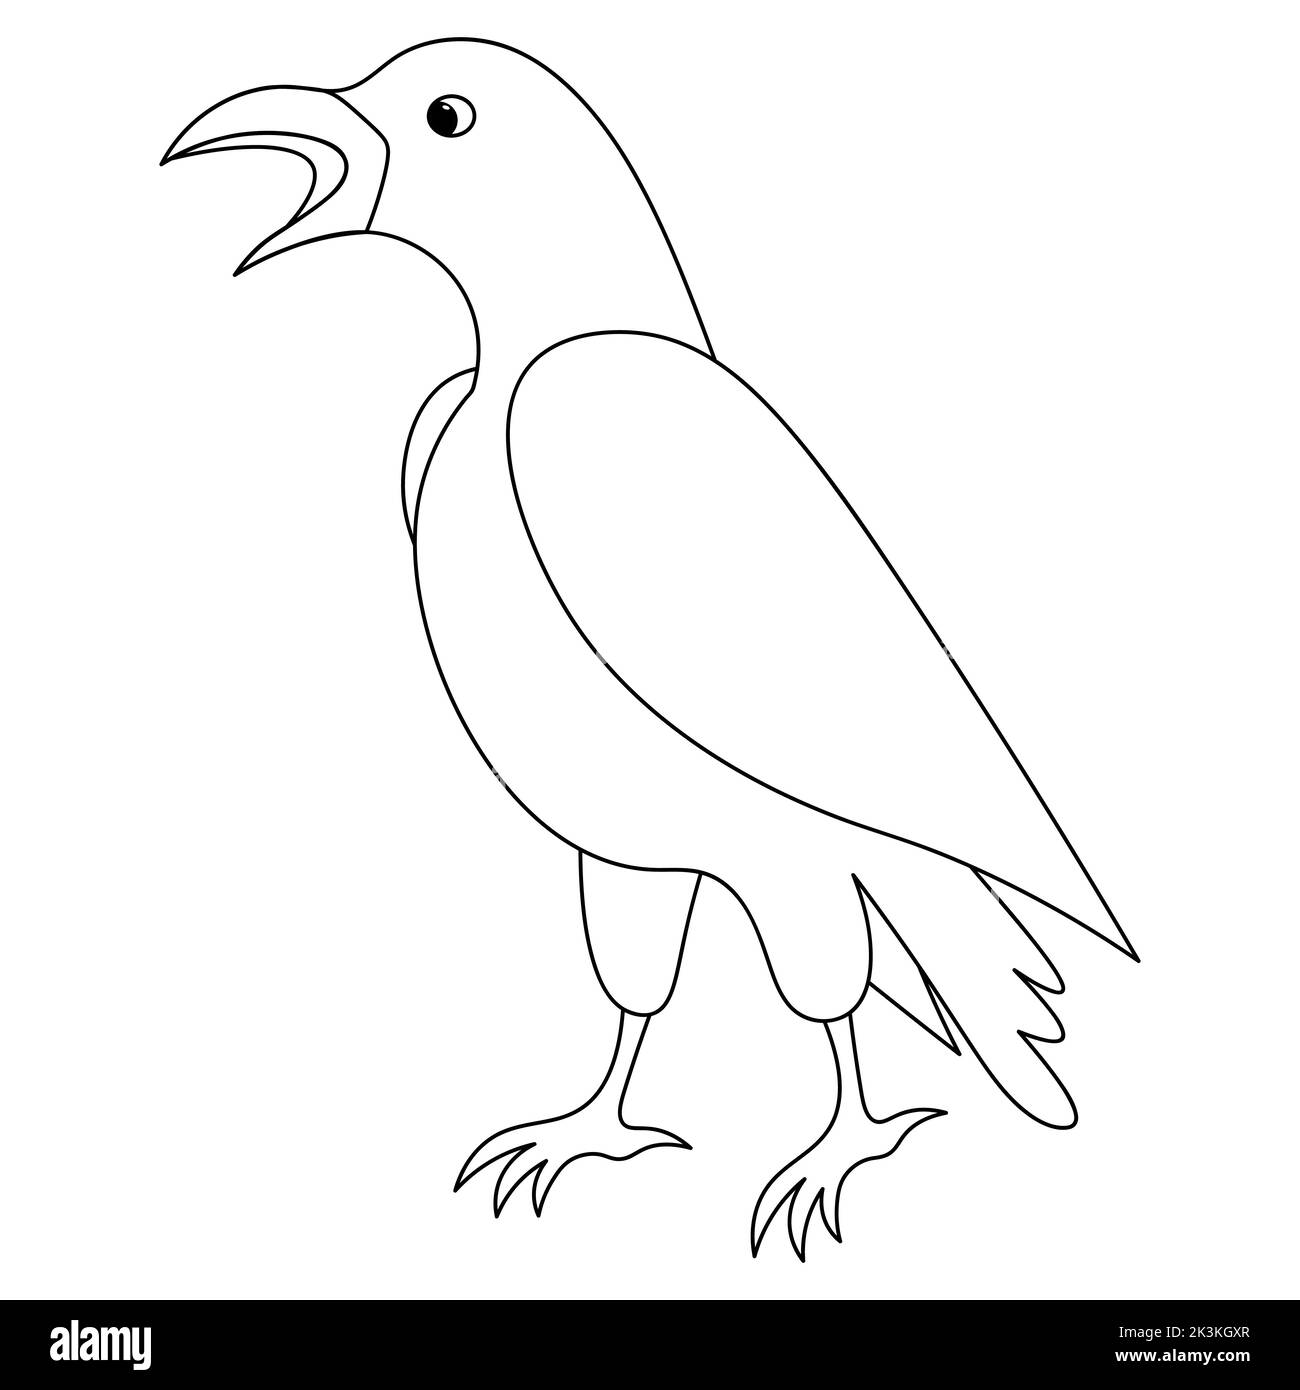 Raven. The mystical black bird croaks loudly. Vector illustration. Outline on an isolated background. Doodle style. Sketch. Coloring book Stock Vector